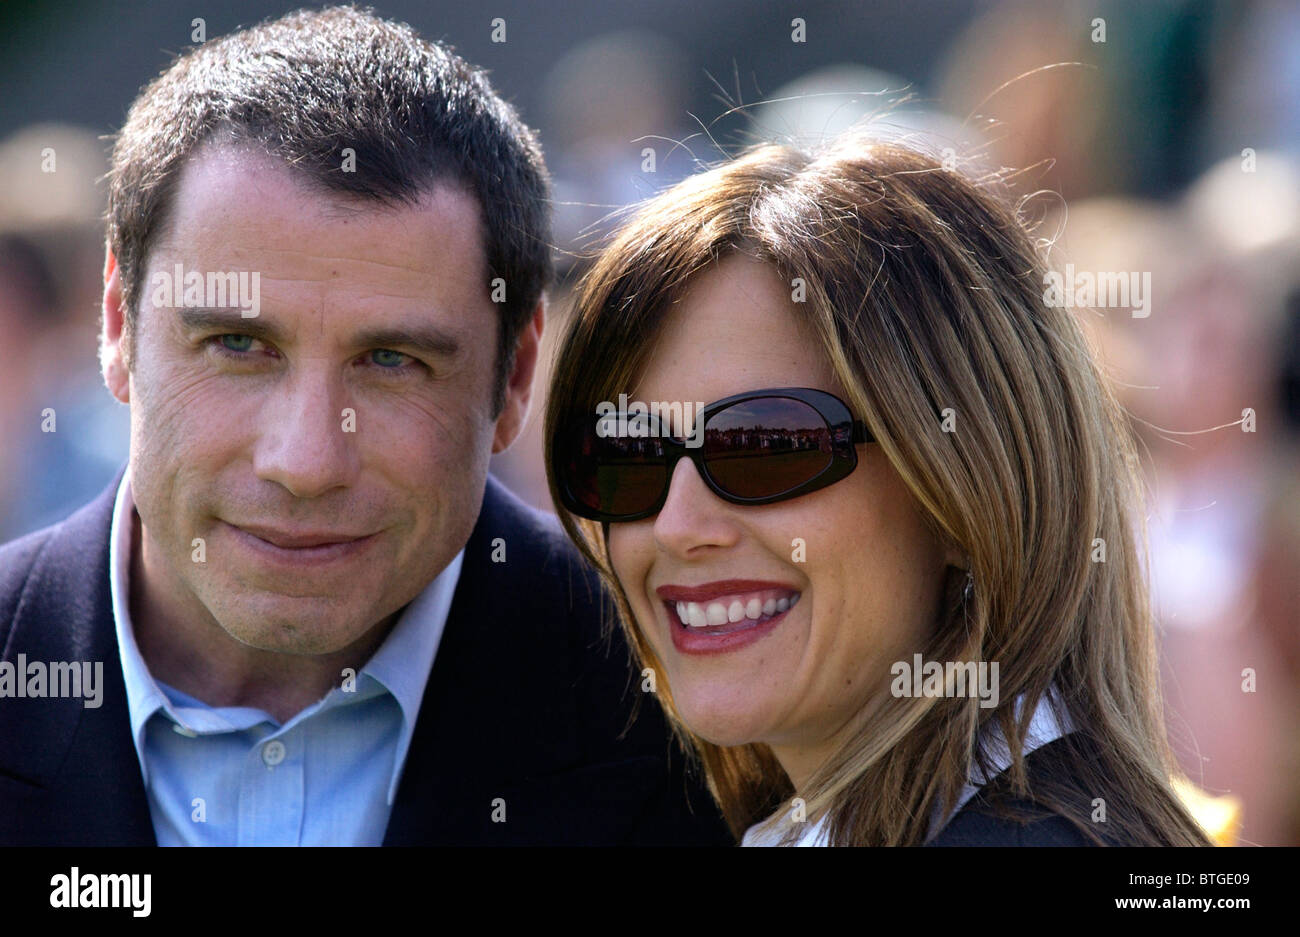 Hollywood star, actorJohn Travolta with his wife Kelly Preston at charity fundraiser polo match in Gloucestershire, UK Stock Photo